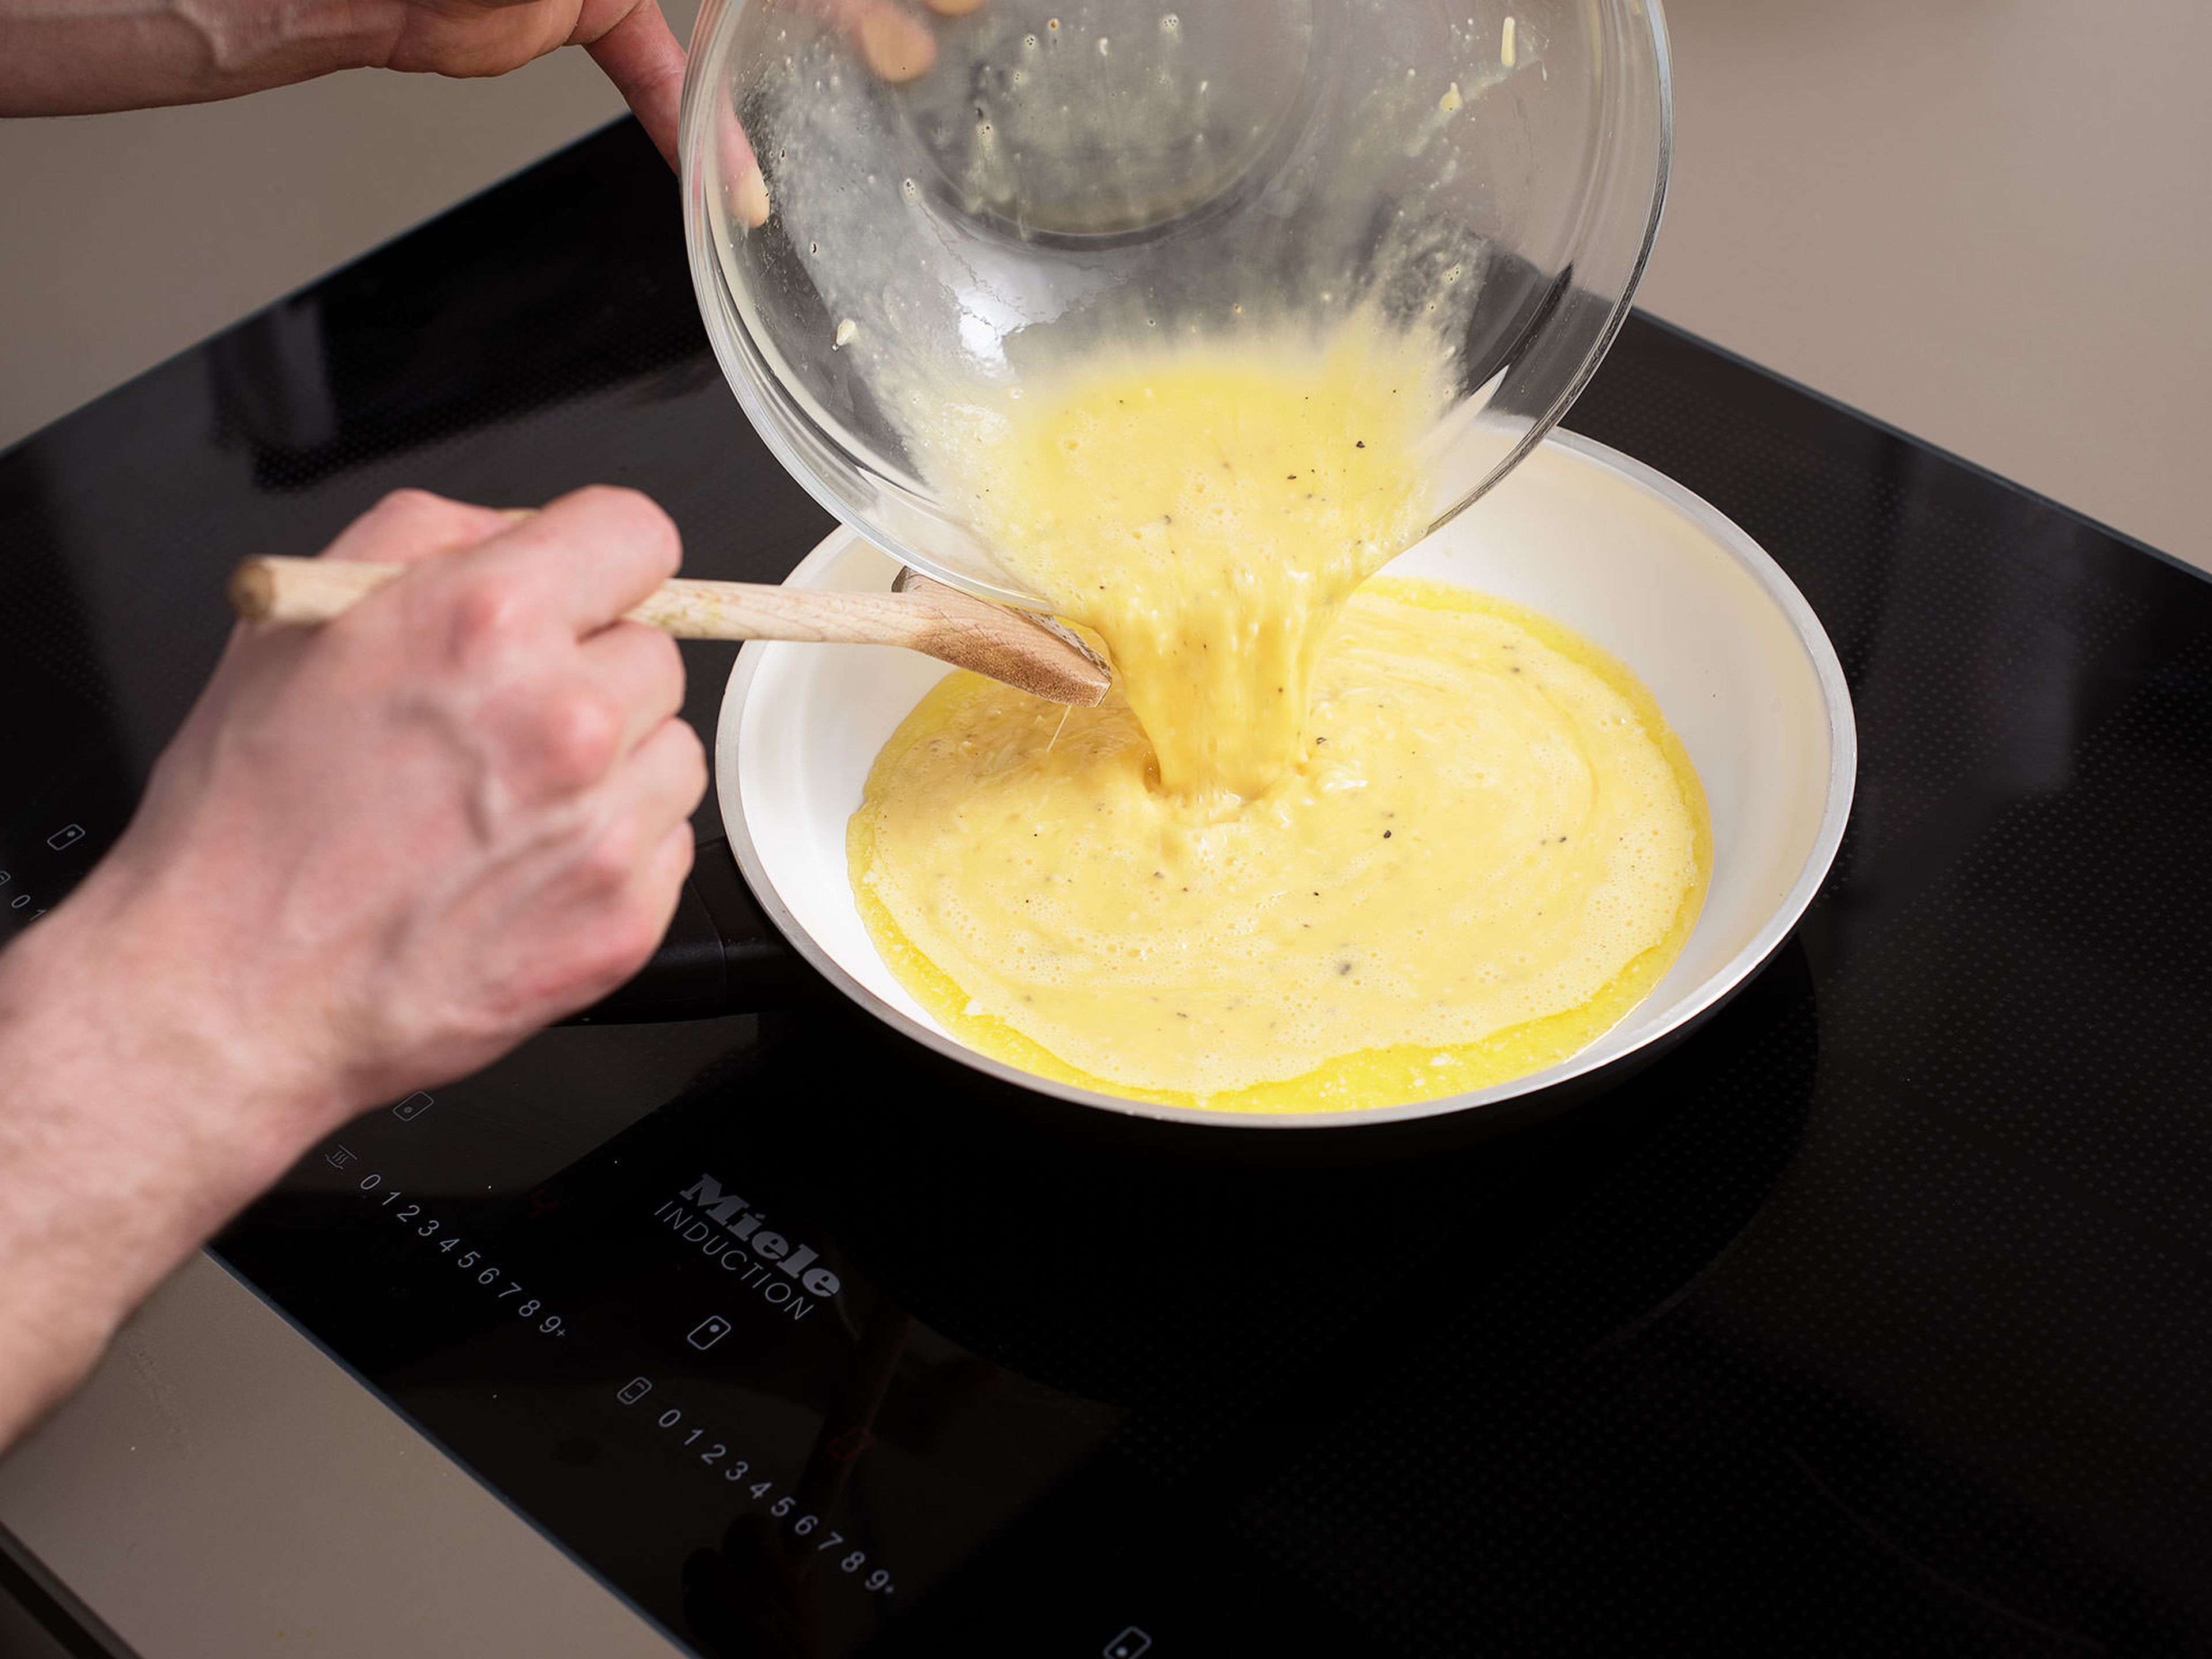 Melt butter in a pan over medium heat. Add egg mixture to the pan and cook slowly for approx. 10 min. Scramble eggs with a cooking spoon until cooked through but still slightly moist.